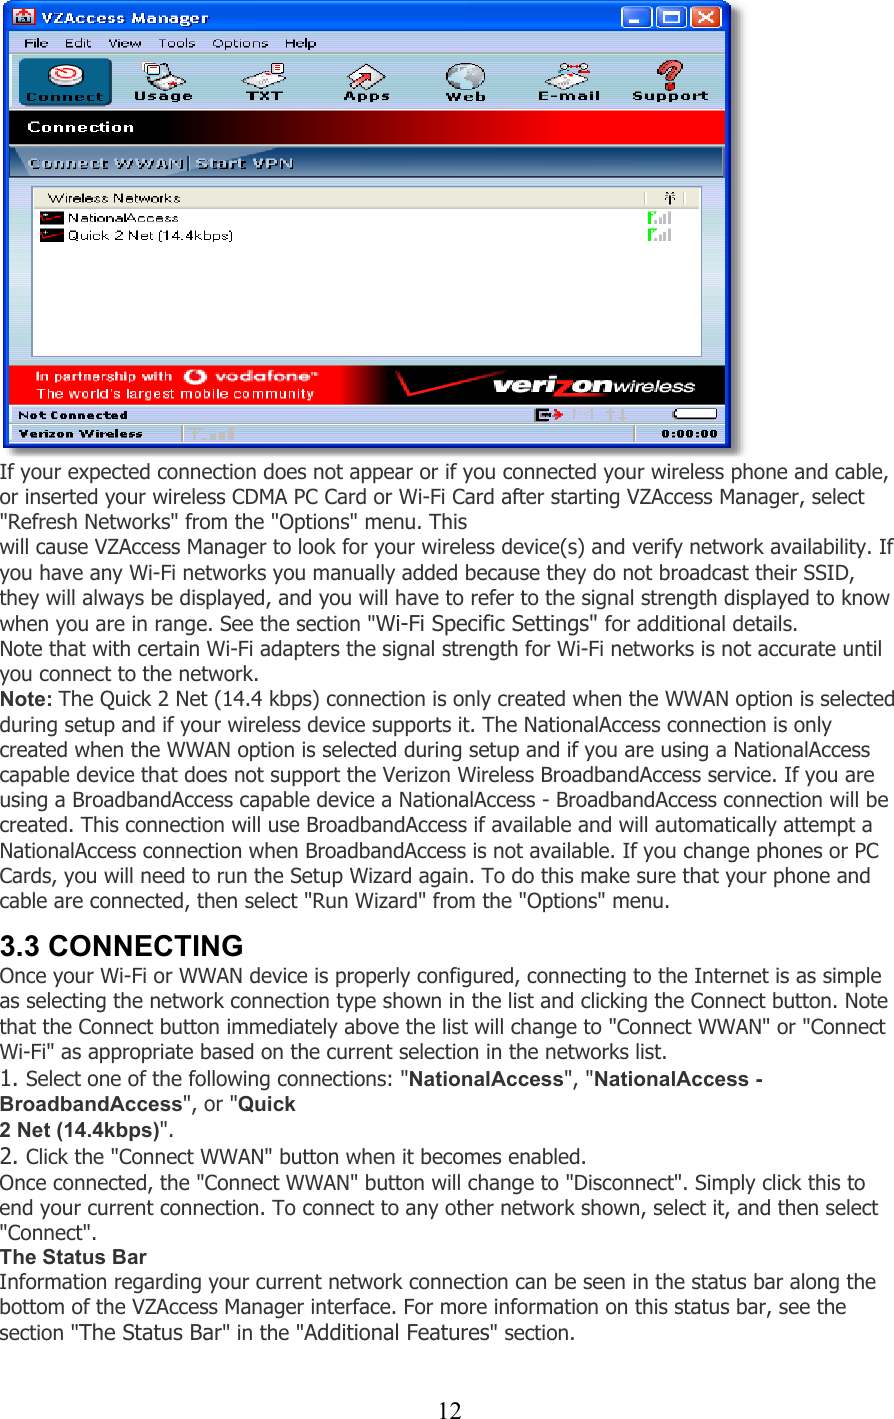  12   If your expected connection does not appear or if you connected your wireless phone and cable, or inserted your wireless CDMA PC Card or Wi-Fi Card after starting VZAccess Manager, select &quot;Refresh Networks&quot; from the &quot;Options&quot; menu. This will cause VZAccess Manager to look for your wireless device(s) and verify network availability. If you have any Wi-Fi networks you manually added because they do not broadcast their SSID, they will always be displayed, and you will have to refer to the signal strength displayed to know when you are in range. See the section &quot;Wi-Fi Specific Settings&quot; for additional details. Note that with certain Wi-Fi adapters the signal strength for Wi-Fi networks is not accurate until you connect to the network. Note: The Quick 2 Net (14.4 kbps) connection is only created when the WWAN option is selected during setup and if your wireless device supports it. The NationalAccess connection is only created when the WWAN option is selected during setup and if you are using a NationalAccess capable device that does not support the Verizon Wireless BroadbandAccess service. If you are using a BroadbandAccess capable device a NationalAccess - BroadbandAccess connection will be created. This connection will use BroadbandAccess if available and will automatically attempt a NationalAccess connection when BroadbandAccess is not available. If you change phones or PC Cards, you will need to run the Setup Wizard again. To do this make sure that your phone and cable are connected, then select &quot;Run Wizard&quot; from the &quot;Options&quot; menu.   3.3 CONNECTING Once your Wi-Fi or WWAN device is properly configured, connecting to the Internet is as simple as selecting the network connection type shown in the list and clicking the Connect button. Note that the Connect button immediately above the list will change to &quot;Connect WWAN&quot; or &quot;Connect Wi-Fi&quot; as appropriate based on the current selection in the networks list. 1. Select one of the following connections: &quot;NationalAccess&quot;, &quot;NationalAccess - BroadbandAccess&quot;, or &quot;Quick 2 Net (14.4kbps)&quot;. 2. Click the &quot;Connect WWAN&quot; button when it becomes enabled. Once connected, the &quot;Connect WWAN&quot; button will change to &quot;Disconnect&quot;. Simply click this to end your current connection. To connect to any other network shown, select it, and then select &quot;Connect&quot;. The Status Bar Information regarding your current network connection can be seen in the status bar along the bottom of the VZAccess Manager interface. For more information on this status bar, see the section &quot;The Status Bar&quot; in the &quot;Additional Features&quot; section.  